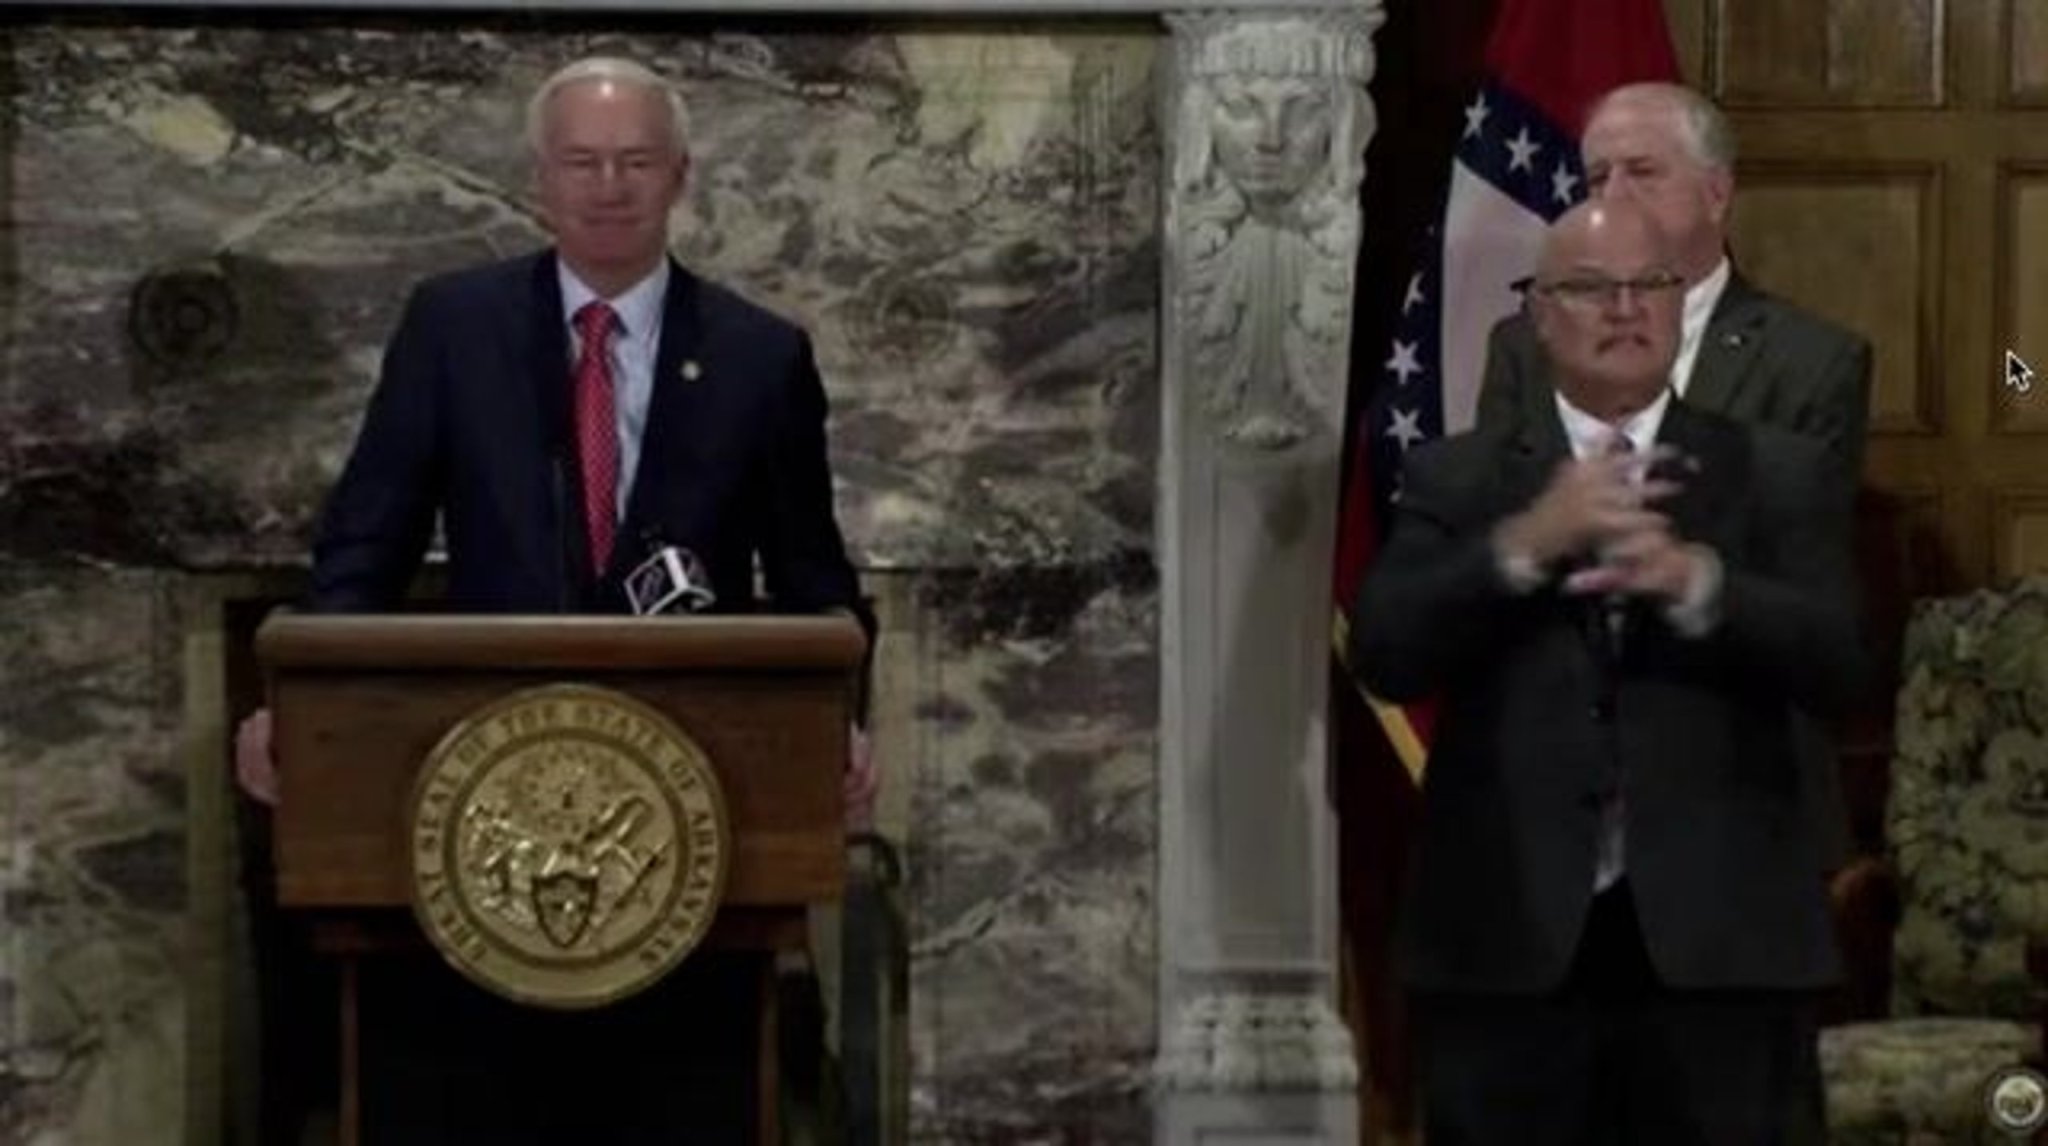 Arkansas governor Asa Hutchinson says the officers in the Crawford County violent arrest are suspended with pay.